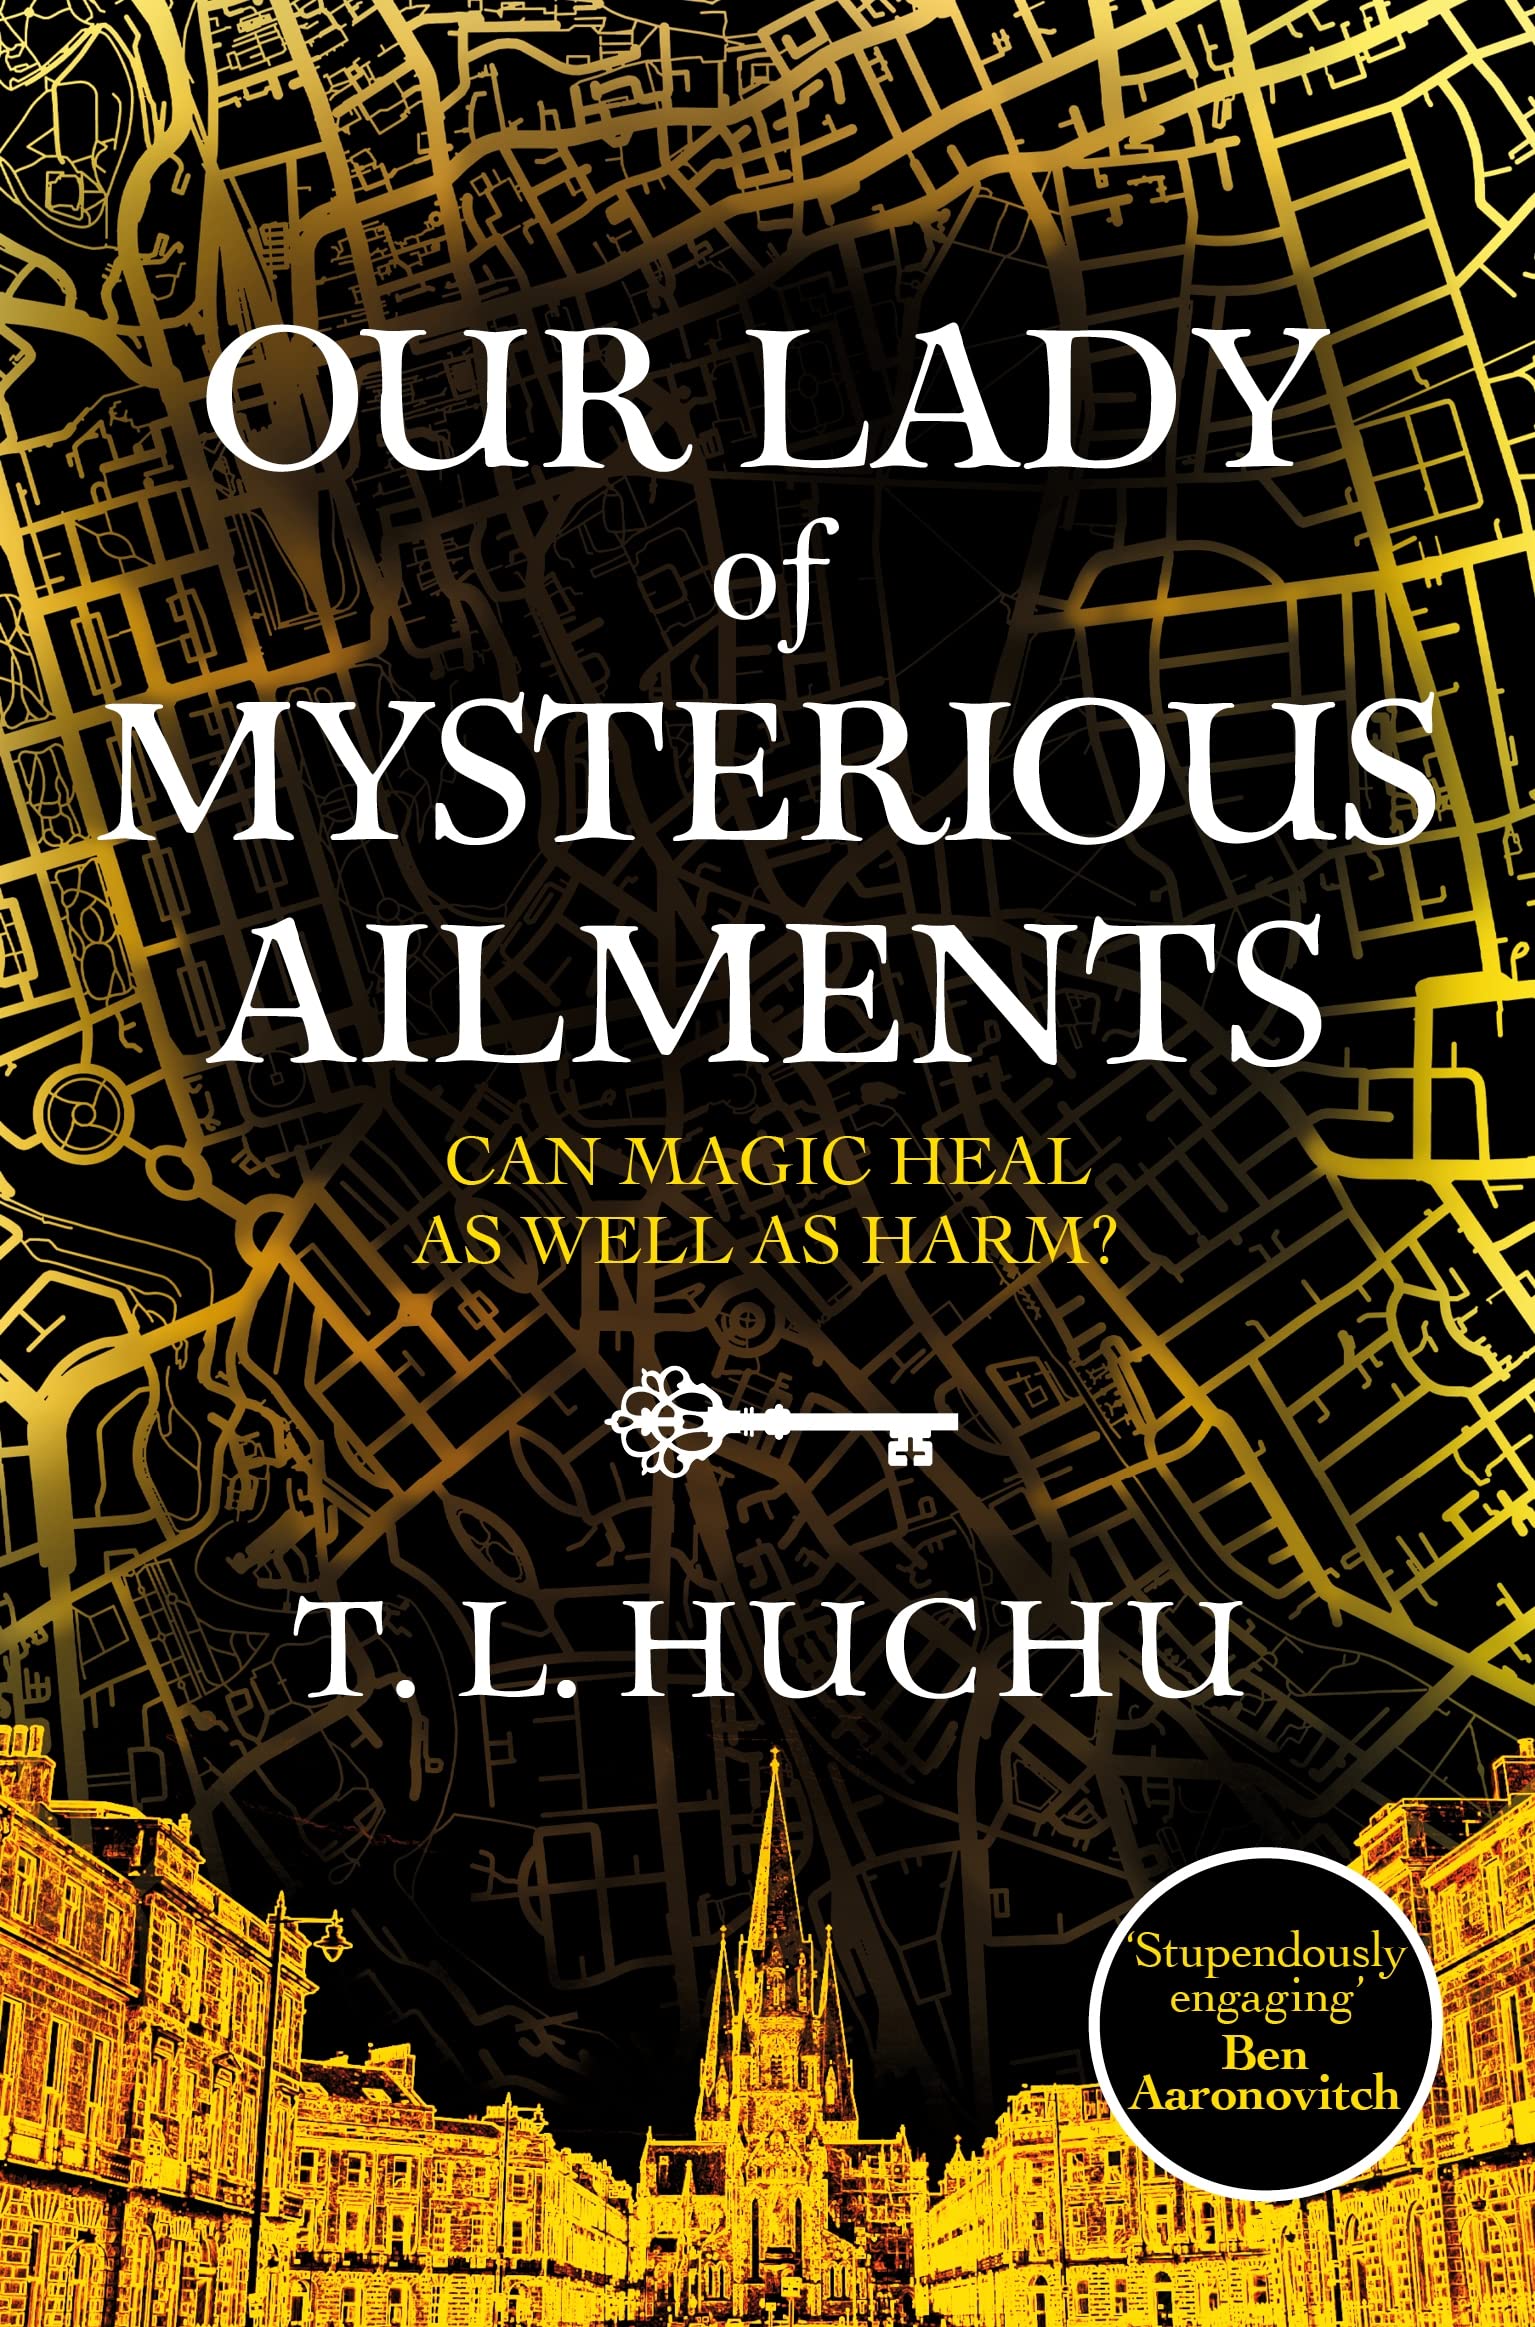 Our Lady of Mysterious Ailments (2022, Pan Macmillan)